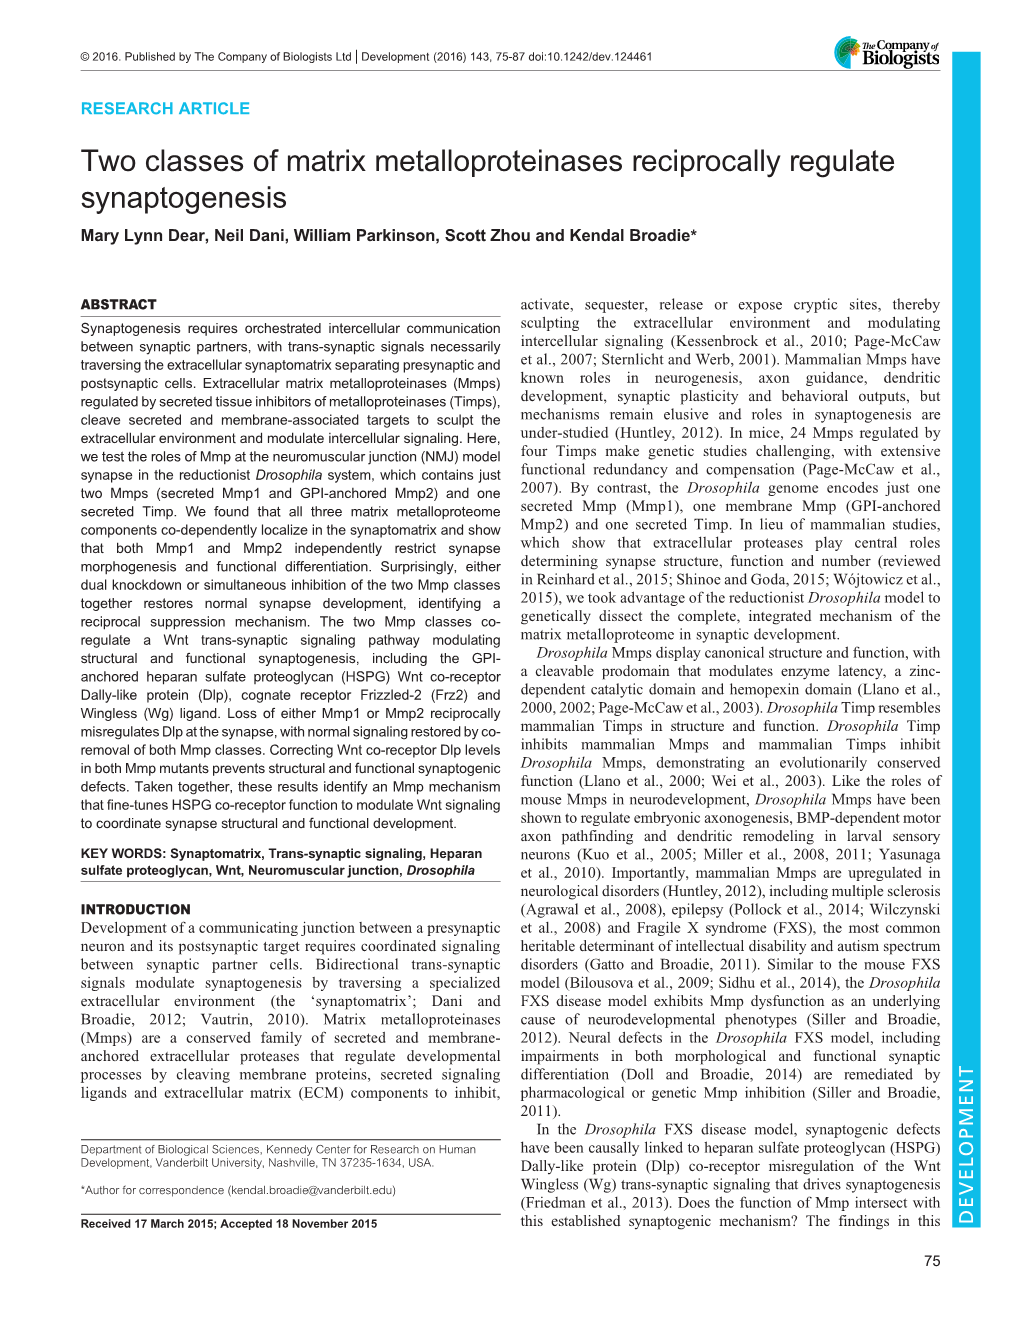 Two Classes of Matrix Metalloproteinases Reciprocally Regulate Synaptogenesis Mary Lynn Dear, Neil Dani, William Parkinson, Scott Zhou and Kendal Broadie*